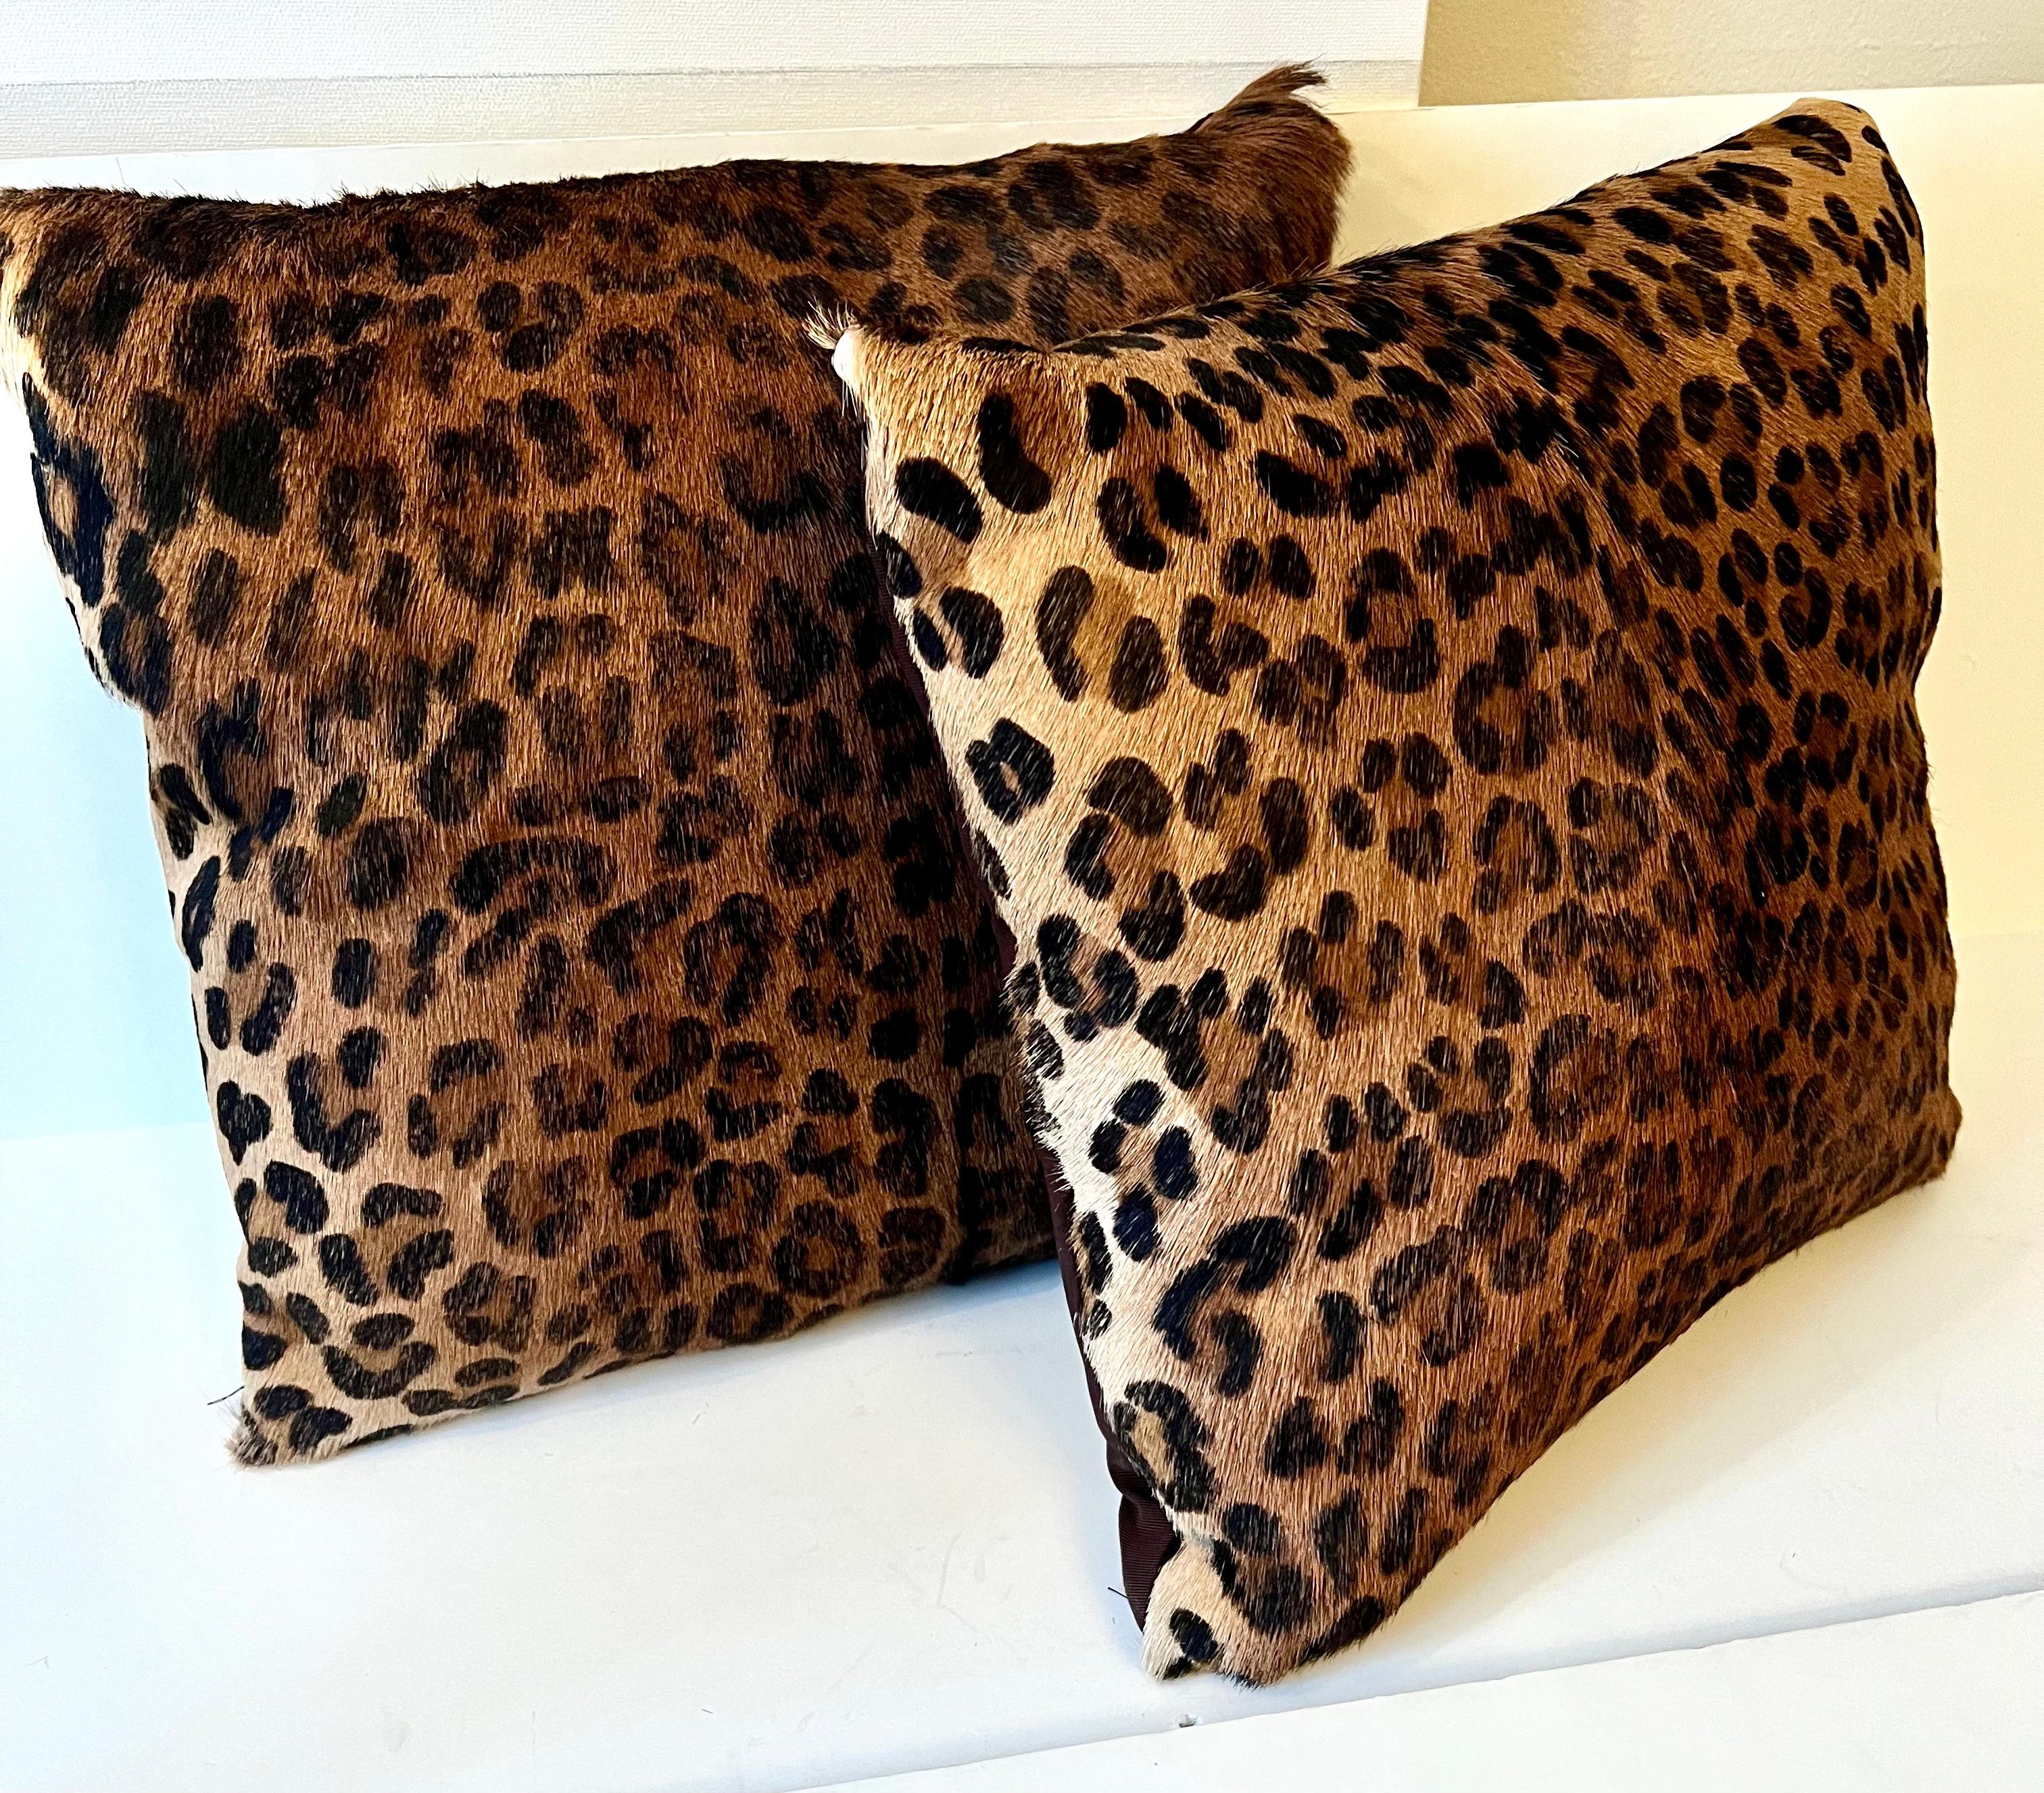 Patinated Pair of Leopard Fur Pillows